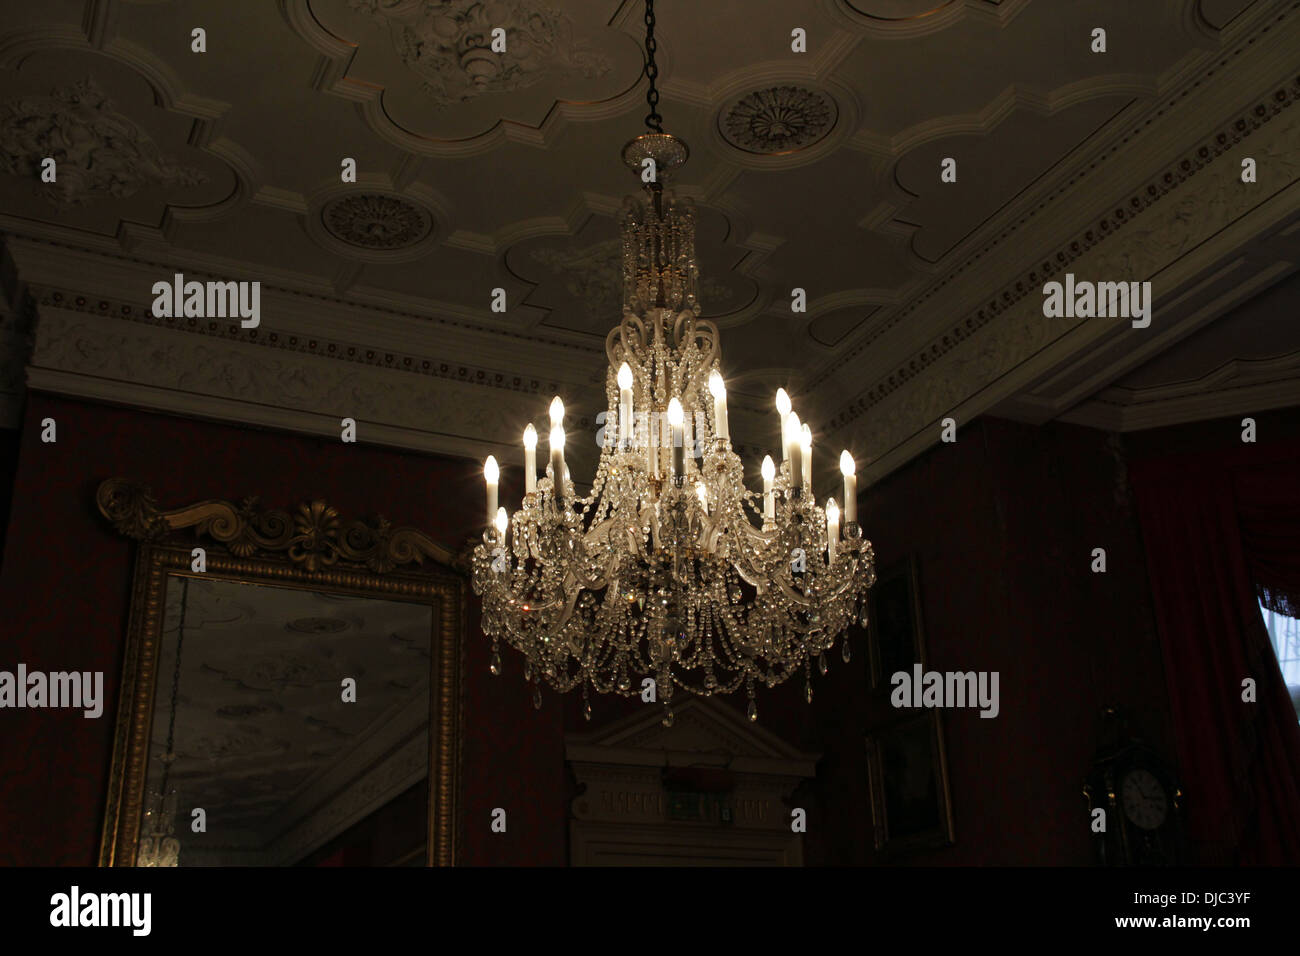 Lite chandelier hanging from a ceiling Stock Photo